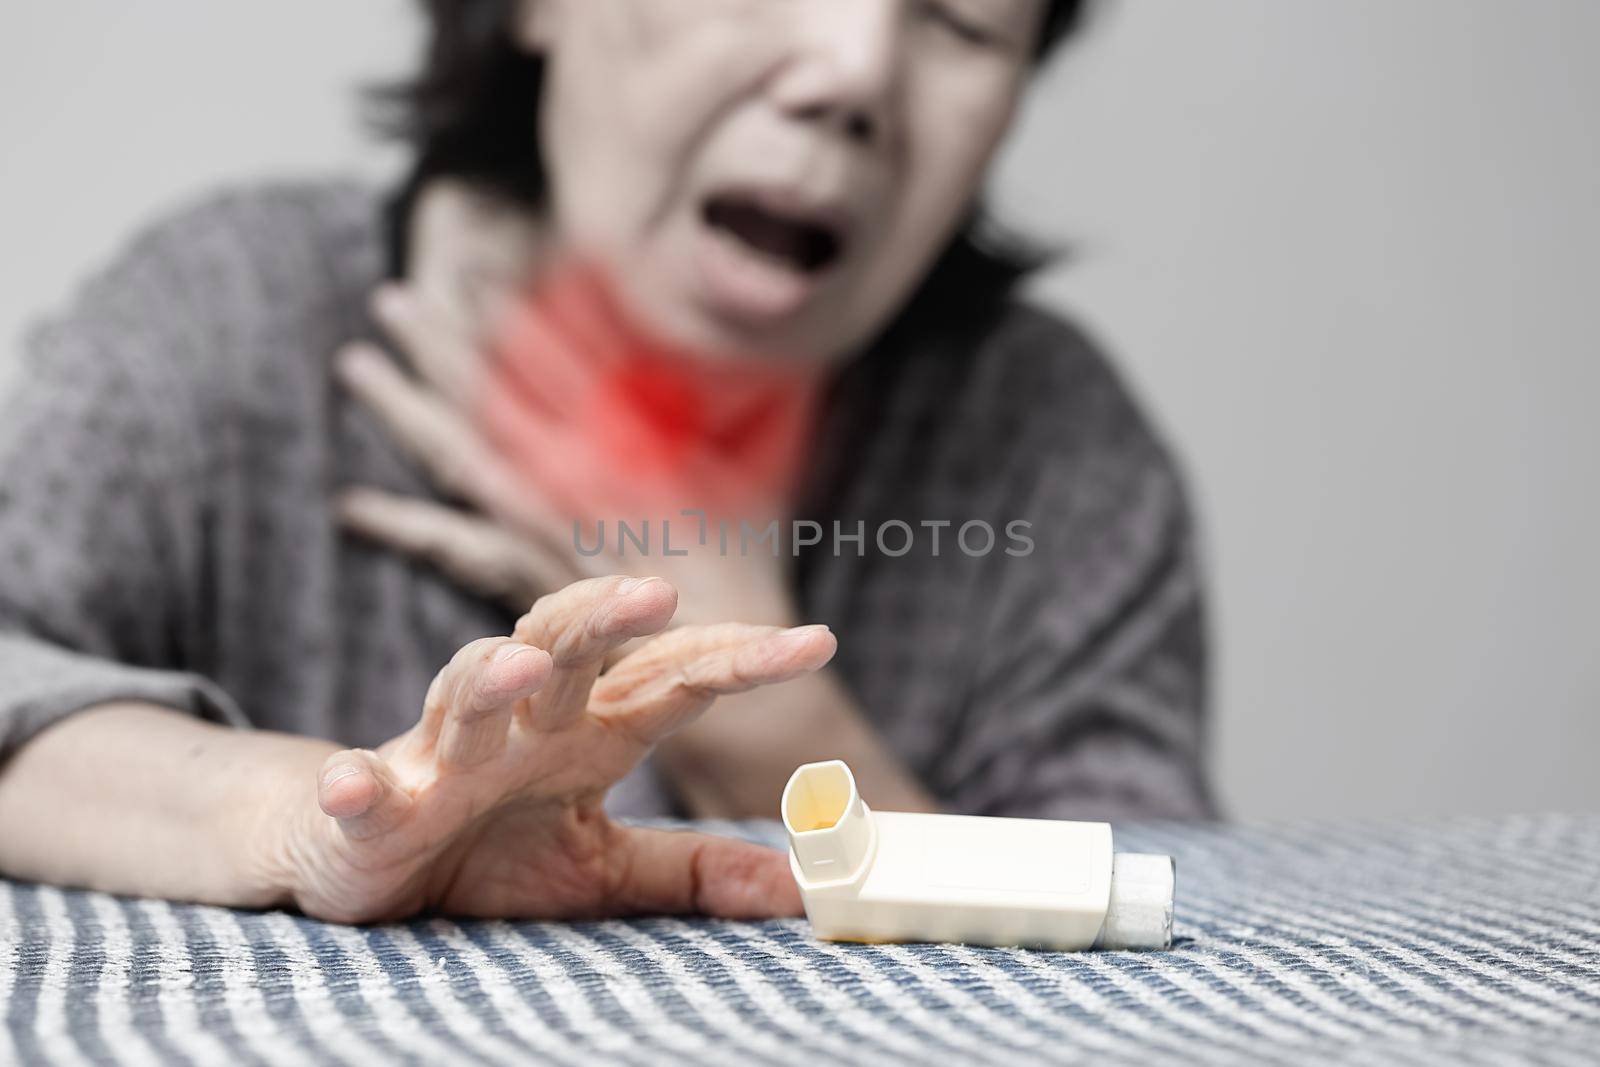 Elderly woman choking and holding an asthma spray by toa55